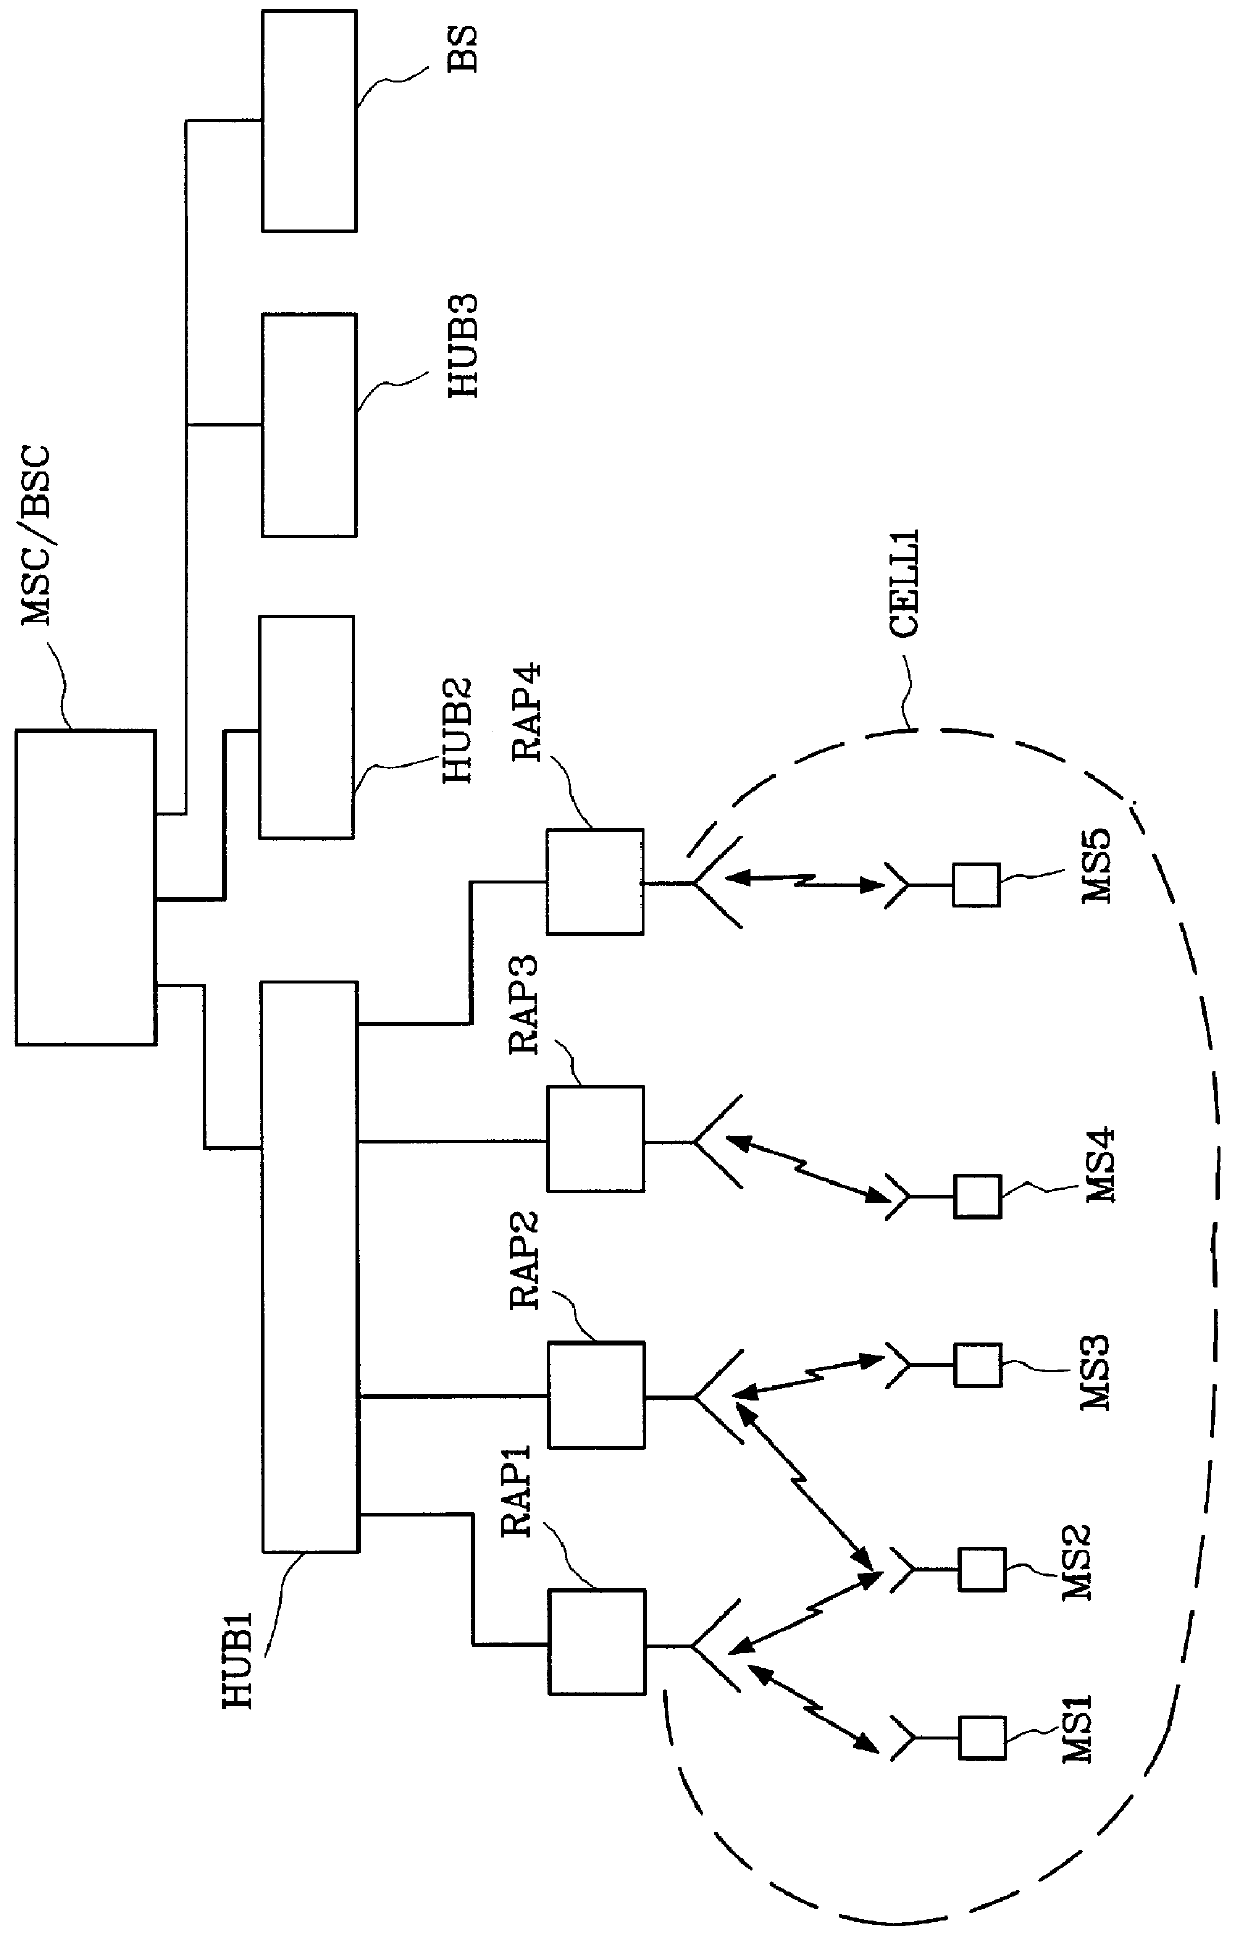 Reuse of a physical control channel in a distributed cellular radio communication system